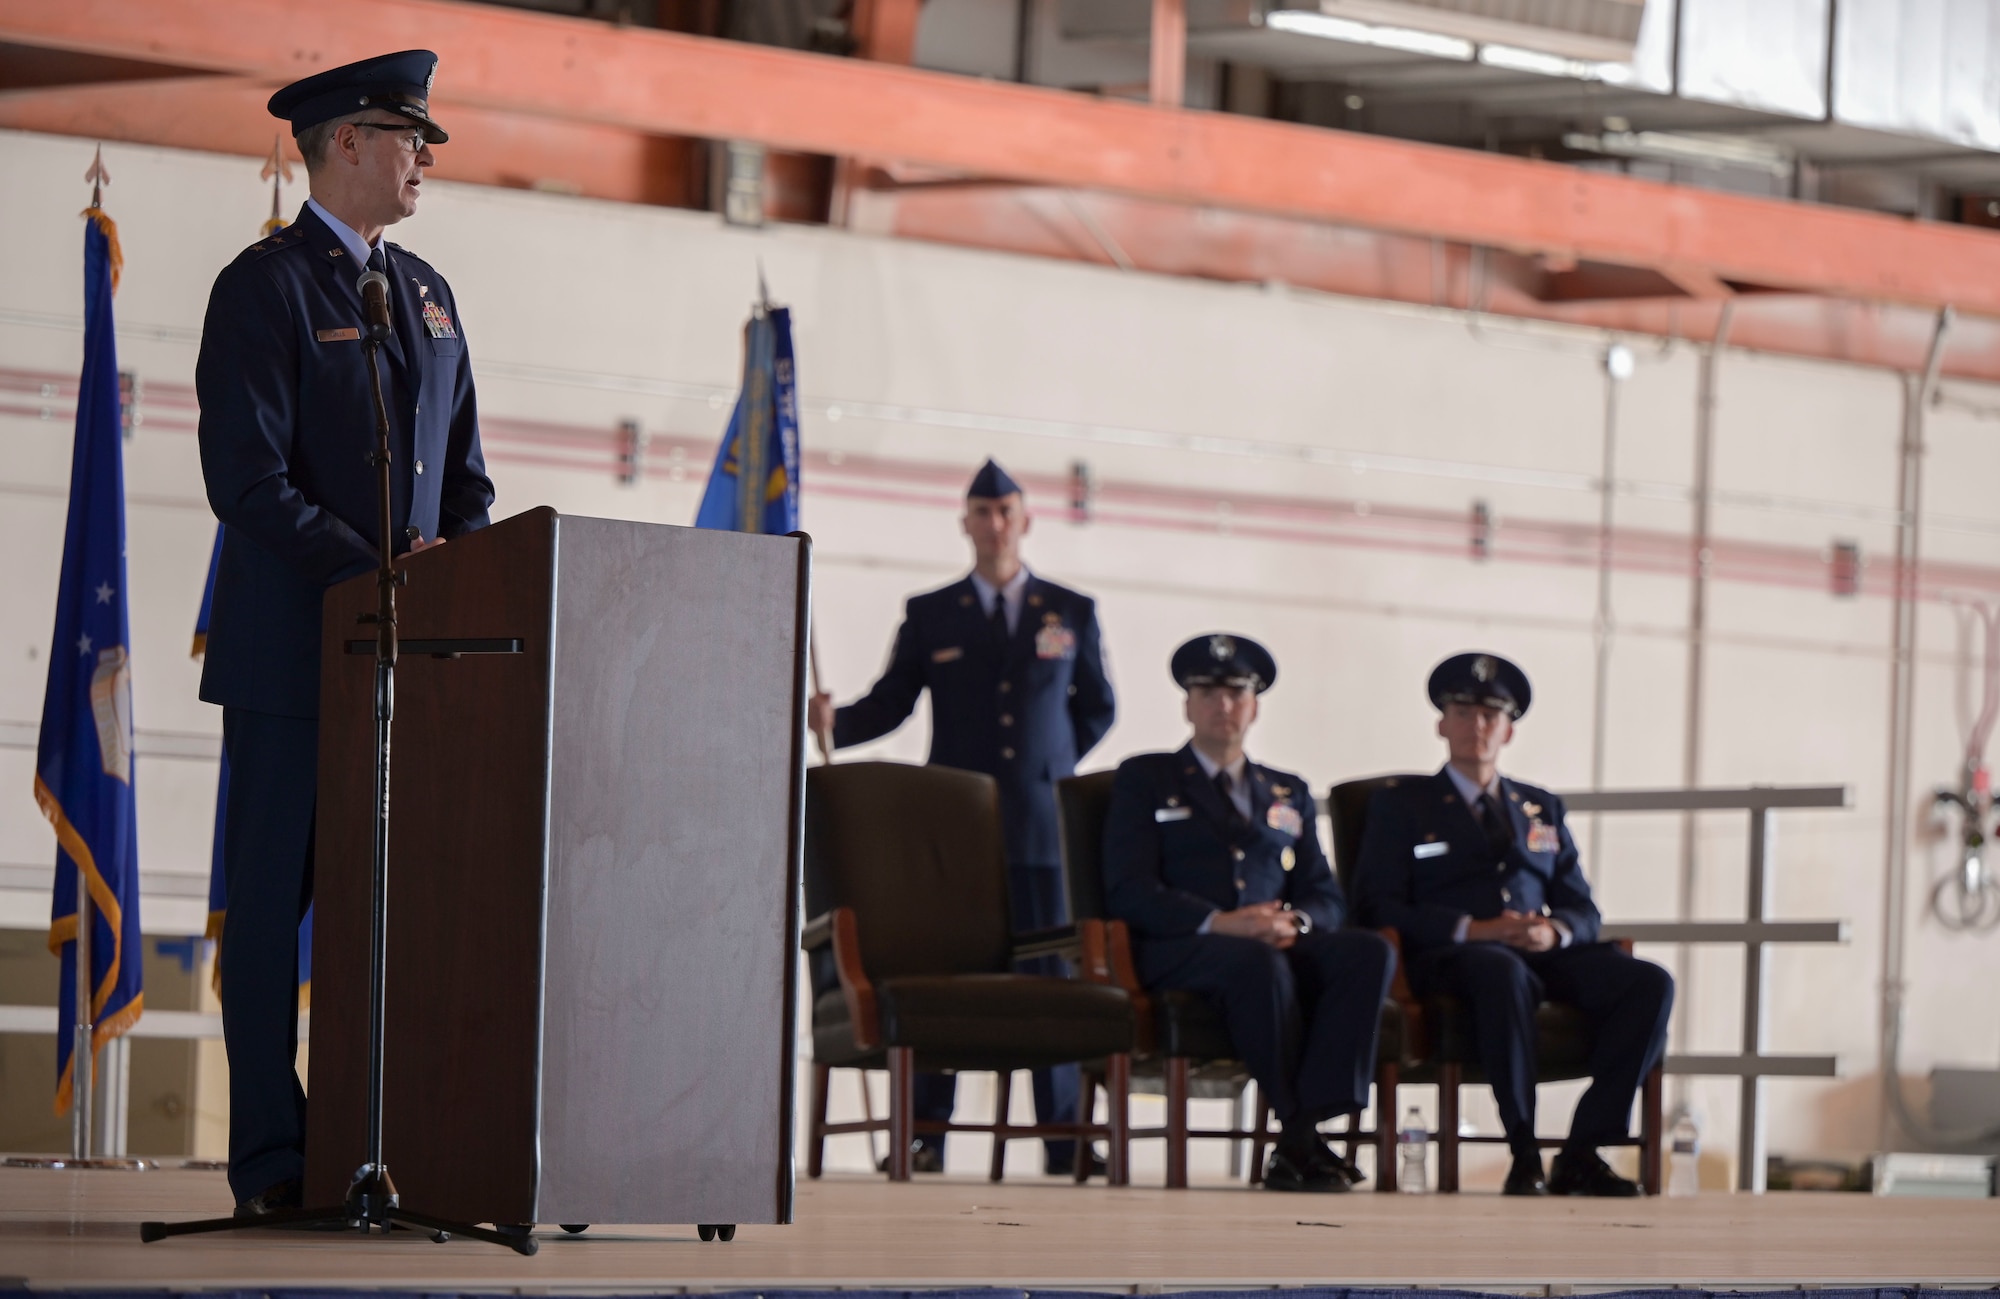 Maj. Gen. Craig D. Wills, 19th Air Force commander, provides remarks during the 49th Wing change of command ceremony June 17, 2022, on Holloman Air Force Base, New Mexico. Col. Ryan P. Keeney relinquished command of the wing to Col. Justin B. Spears after two years of leading the U.S. Air Force’s premier F-16 Viper and MQ-9 Reaper aircrew training base. (U.S. Air Force photo by Airman 1st Class Antonio Salfran)